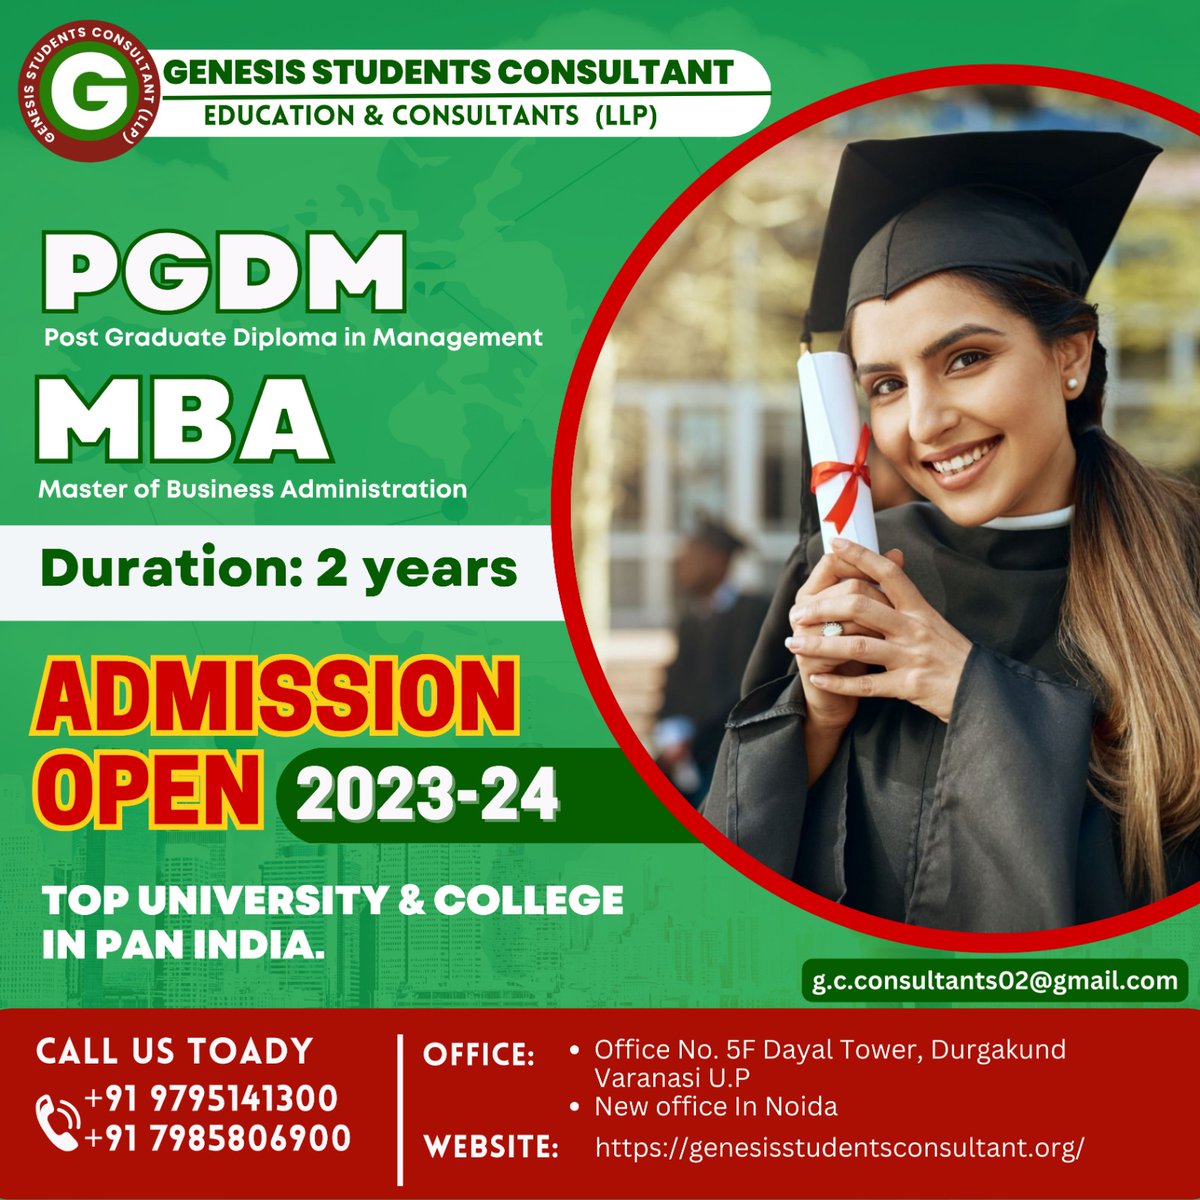 Grab the opportunity and make your career in management. Admission open for PGDM & MBA.

 Book Your Seat And Confirm Admission.
.
#genesisstudentsconsultants #medical #mbbs #md #bscnursing #bhmsexams #bpharmacy #dpharmacy #bams #bhms #bhmsstudents #bums #education #advisor